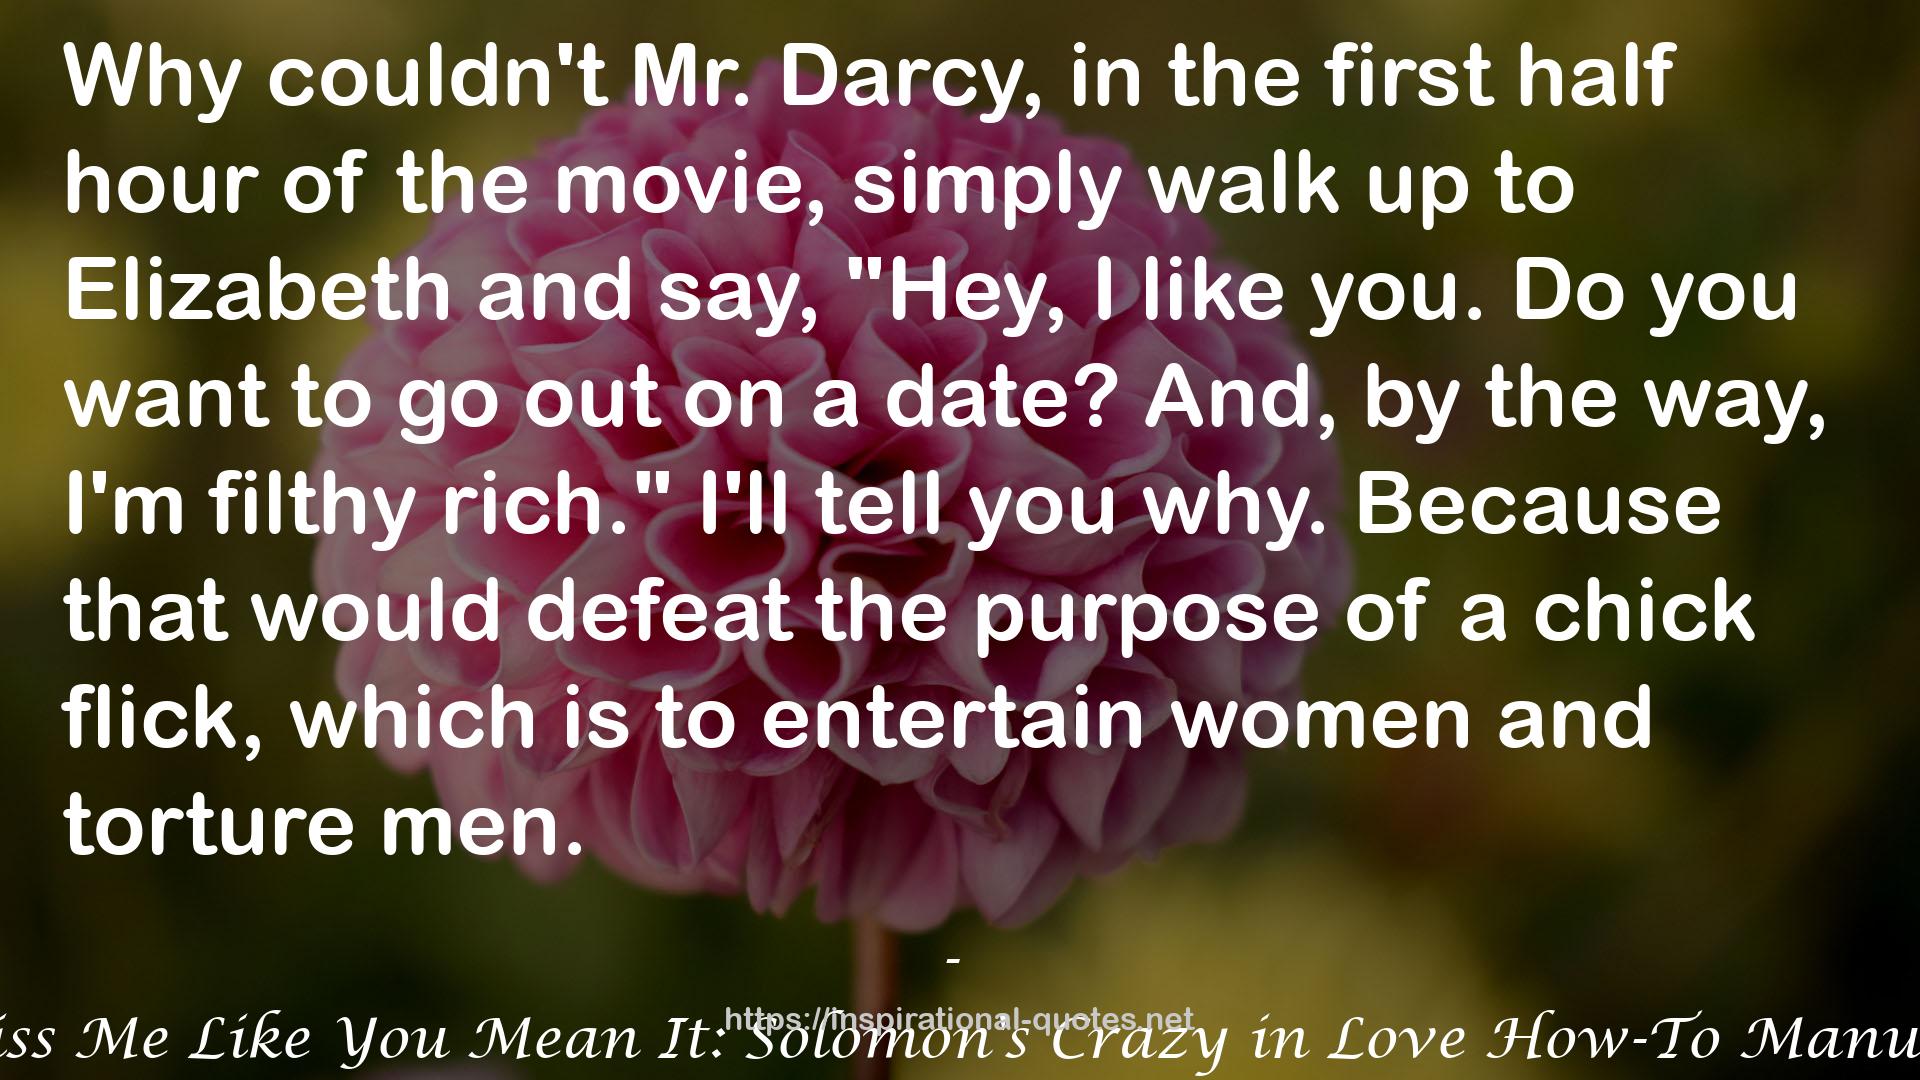 Kiss Me Like You Mean It: Solomon's Crazy in Love How-To Manual QUOTES